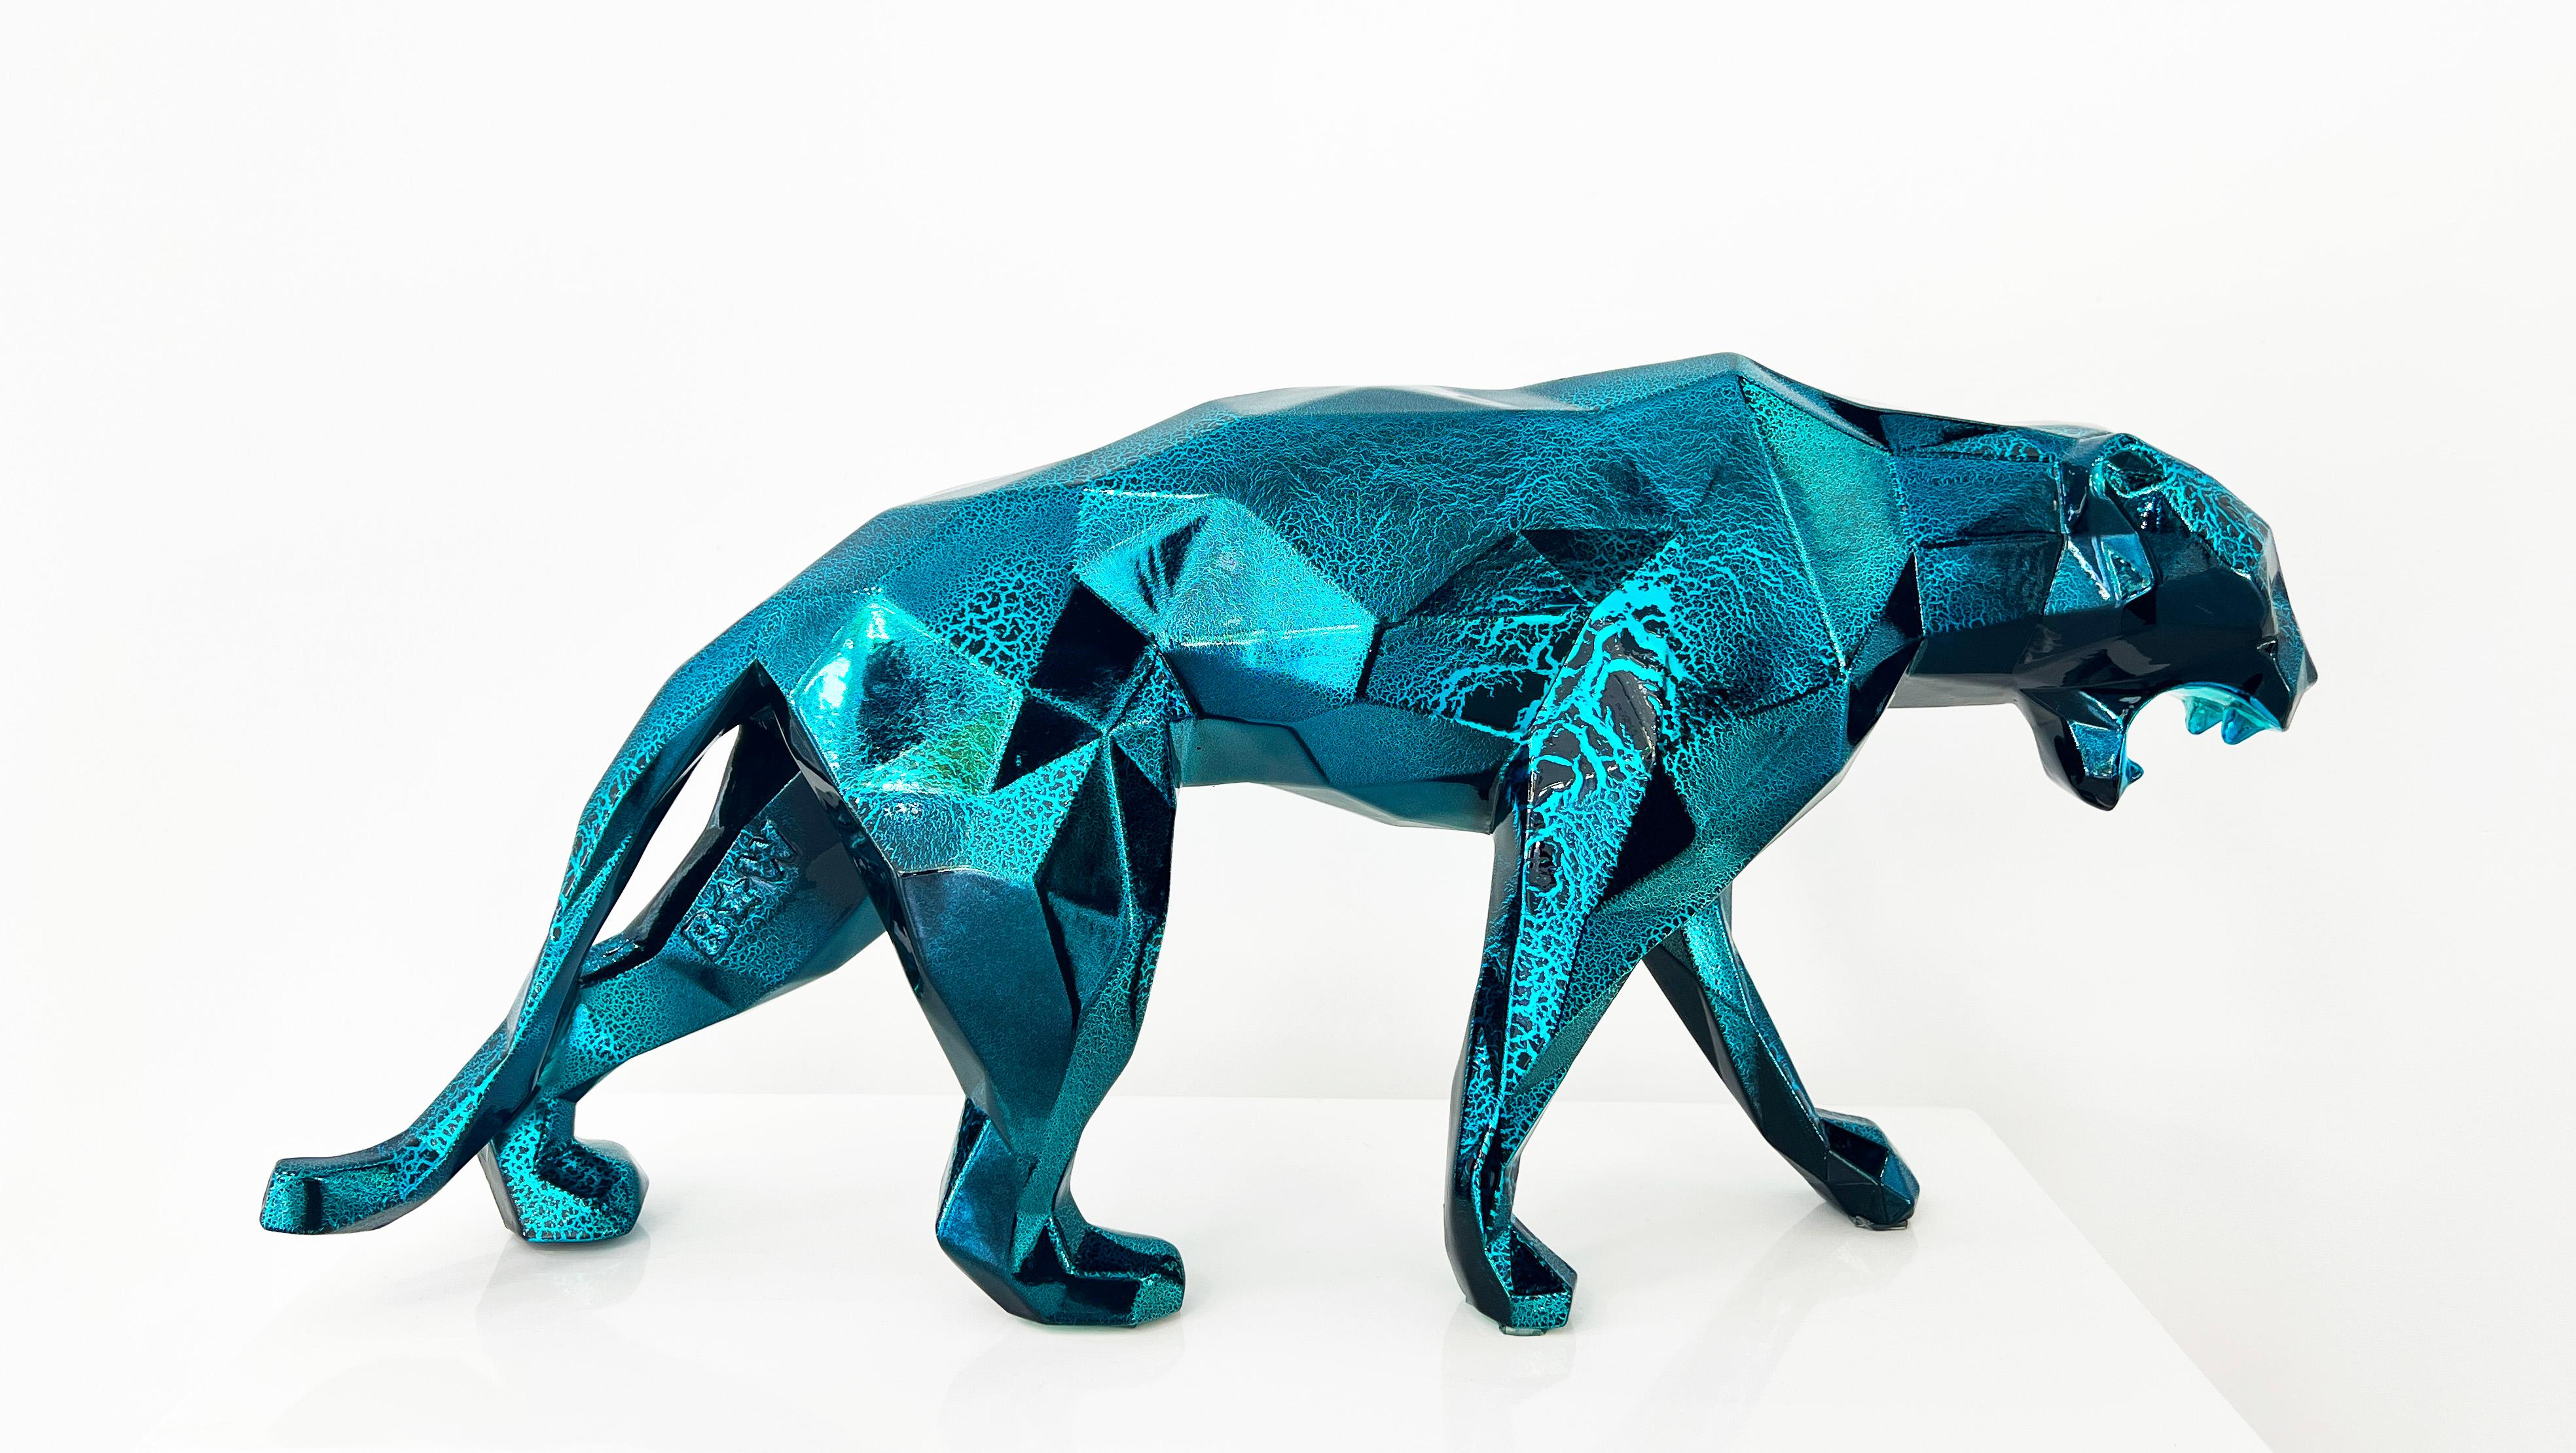 Panther Chrome Crackled Turquoise - Sculpture by Richard Orlinski